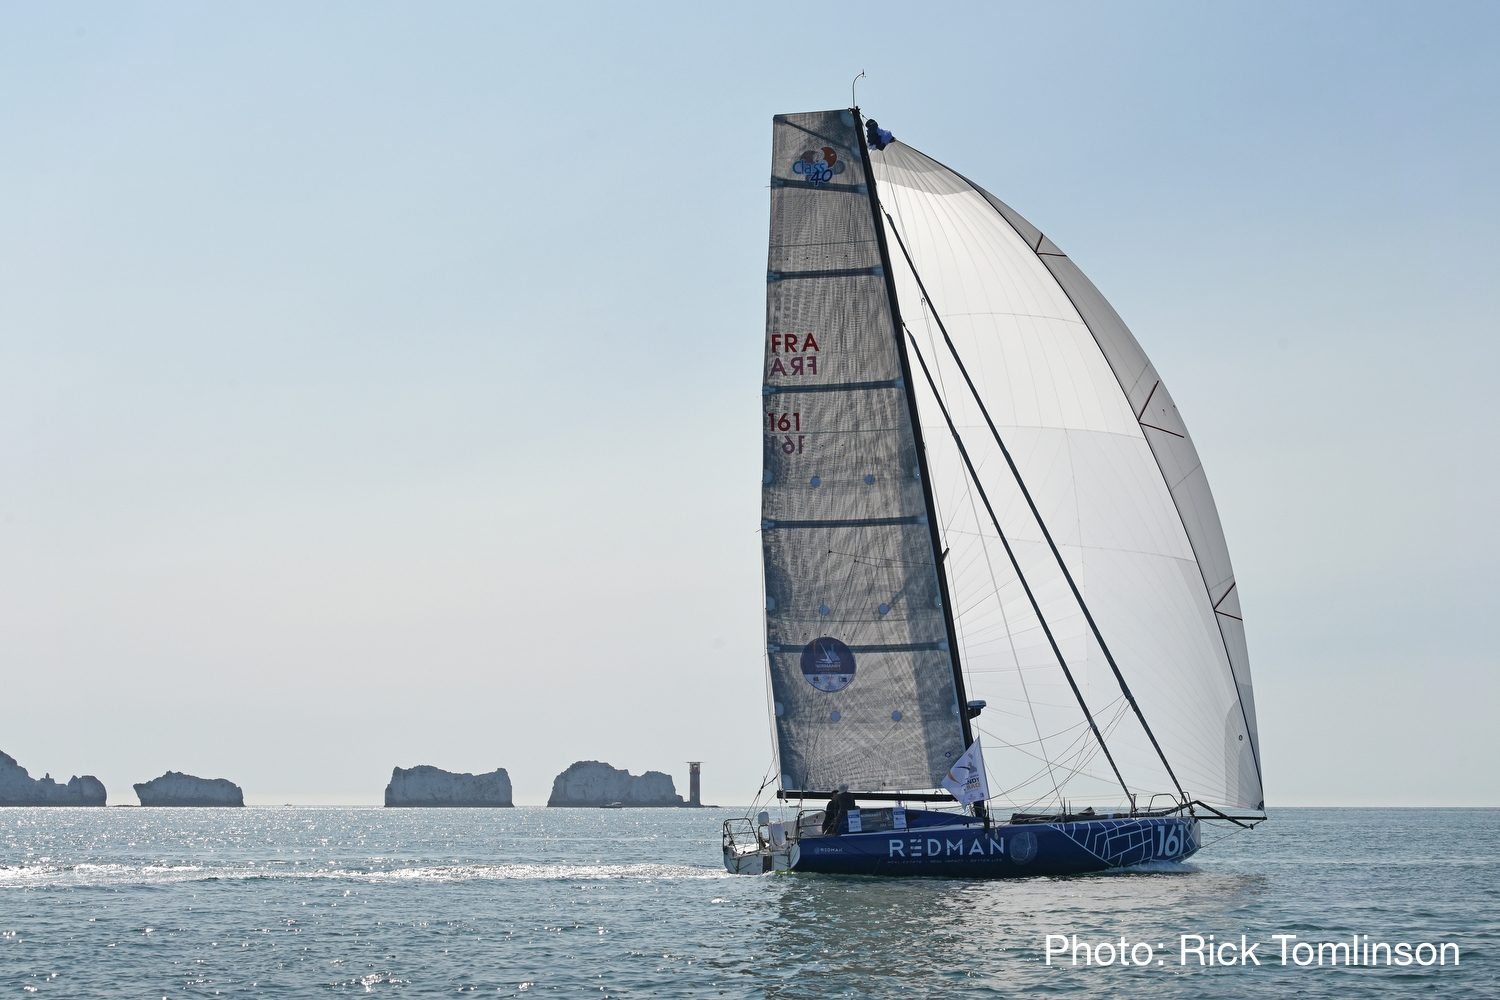  Class 40  Normandy Channel Race  Caen FRA  Day 5, duel on top with 100 miles left